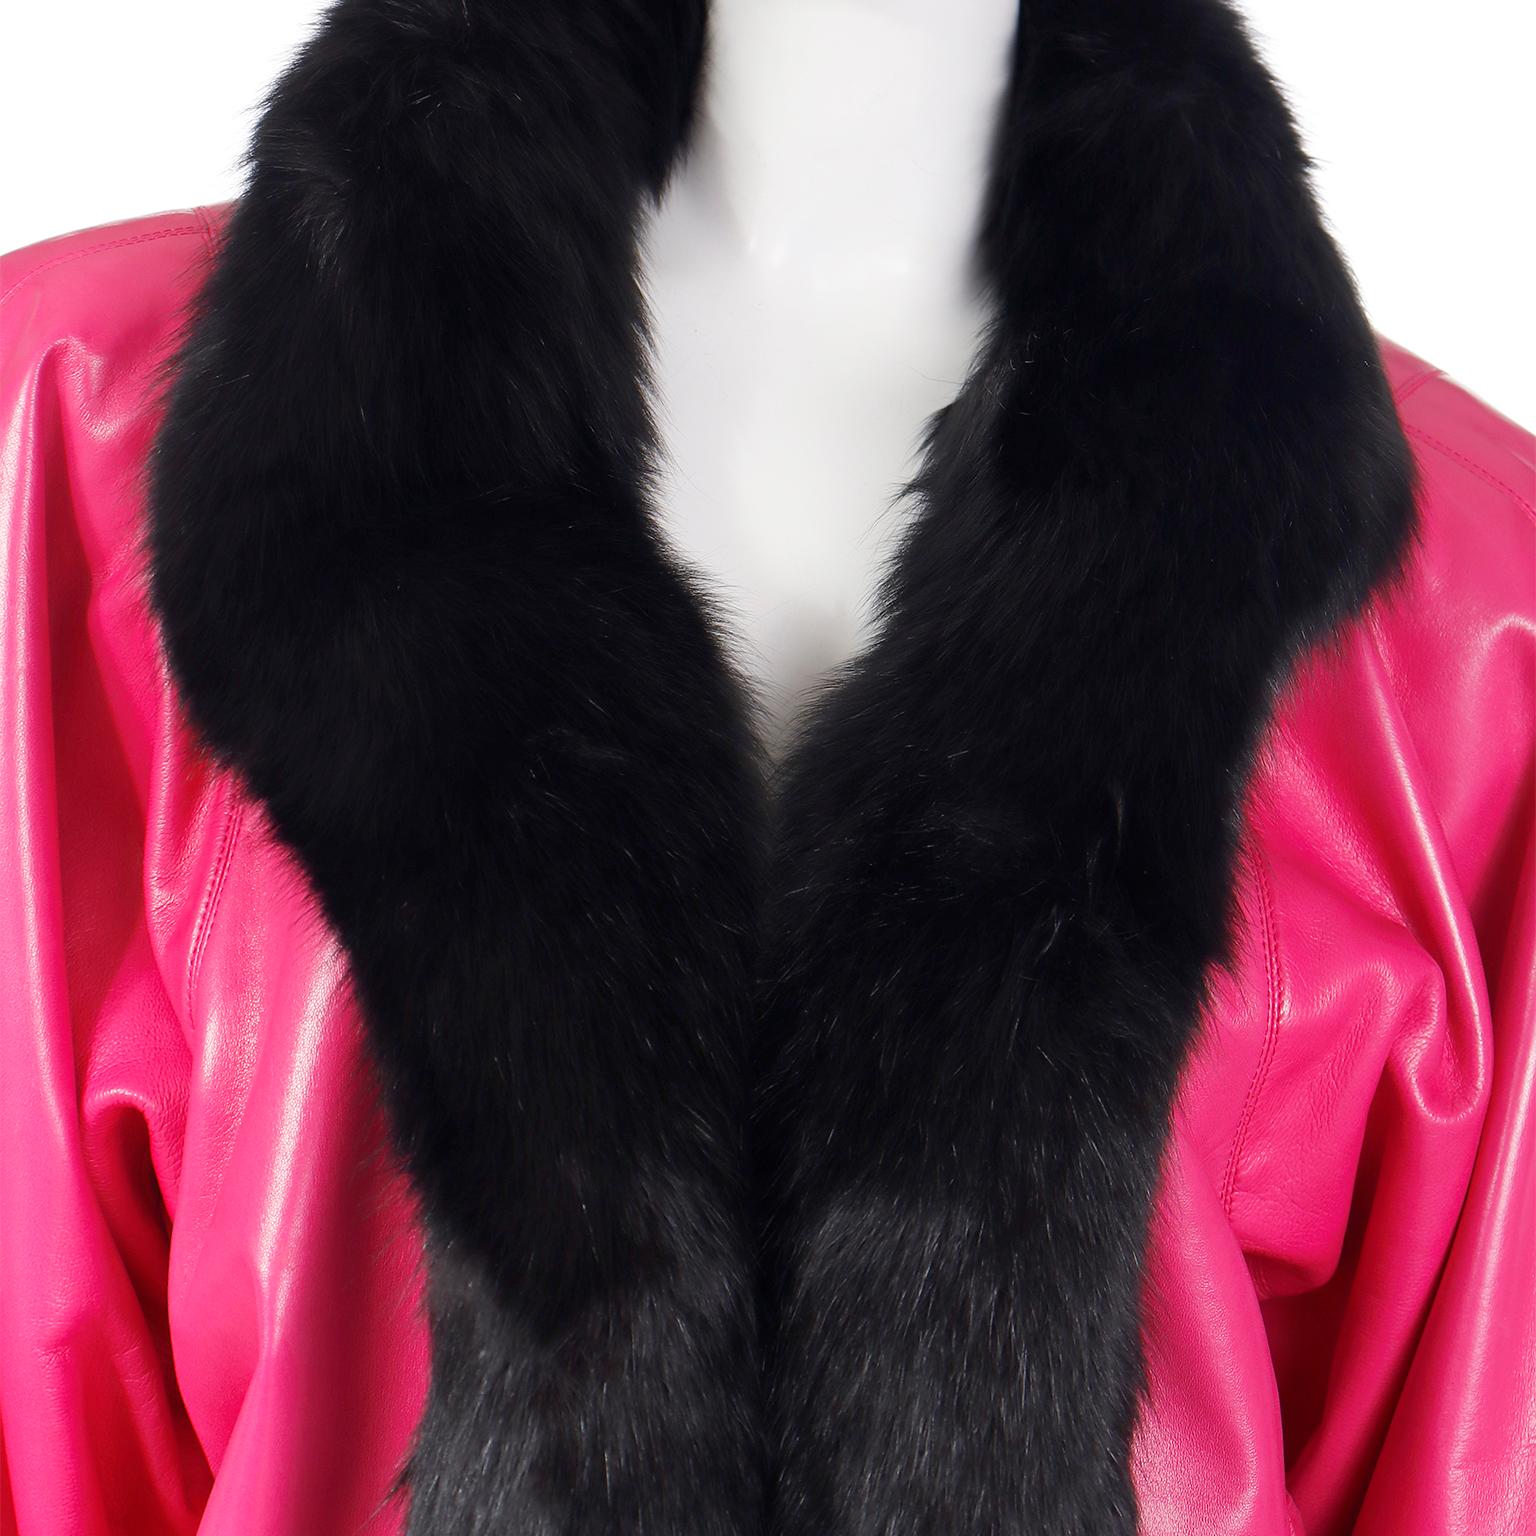 1987 Yves Saint Laurent Runway Haute Couture Pink Leather Jacket w Black Fur For Sale 1